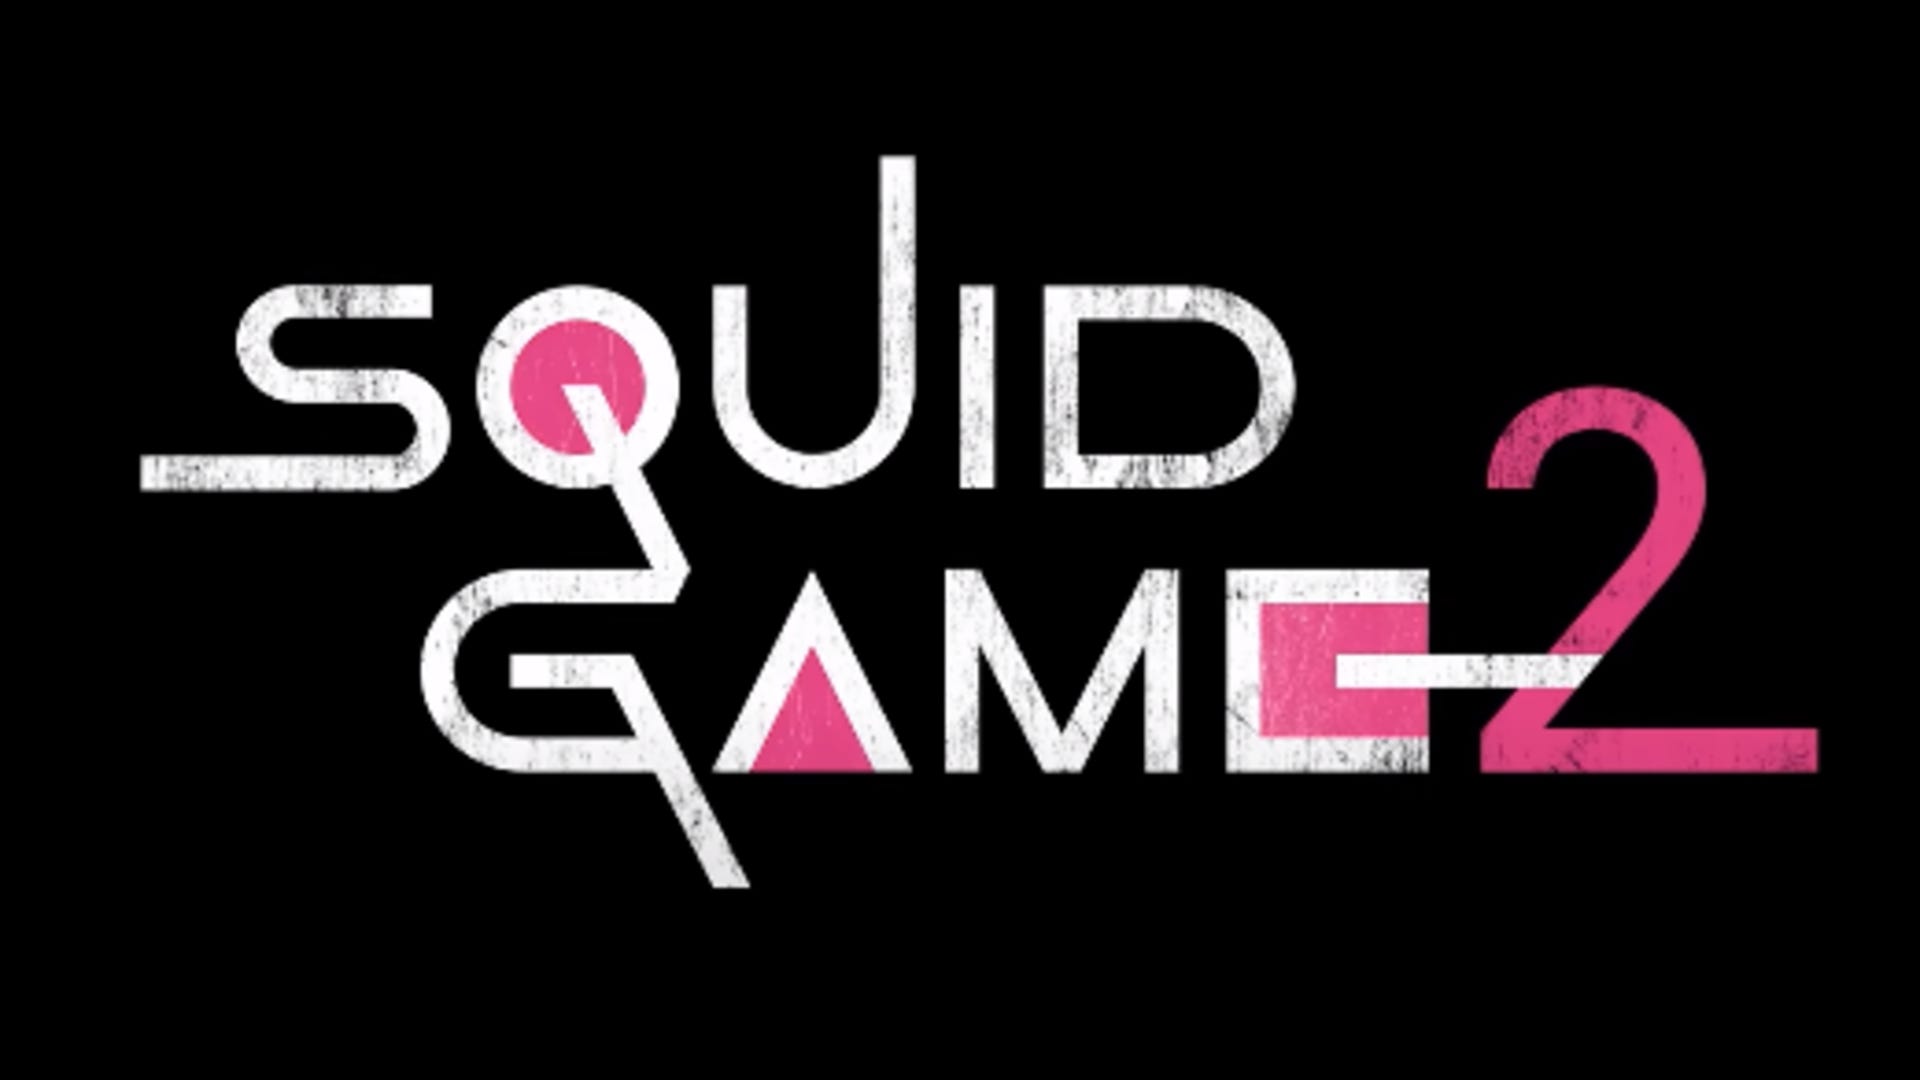 Netflix reminds everyone Squid Game season 2 is coming this year with a 13-second teaser